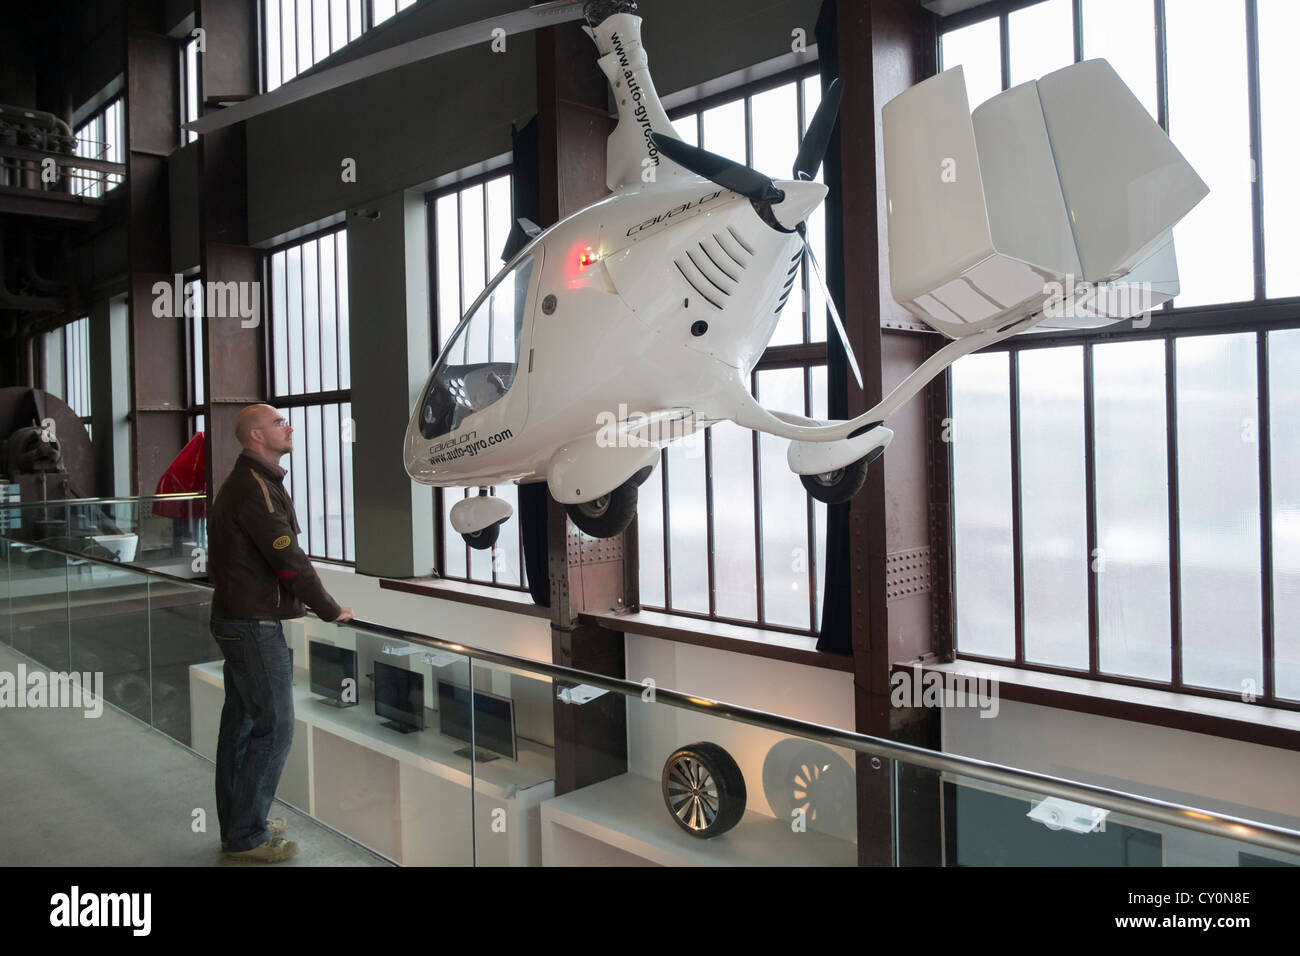 Gyrocopter or Aerogyro on display at Red dot Design Museum in Essen Germany Stock Photo